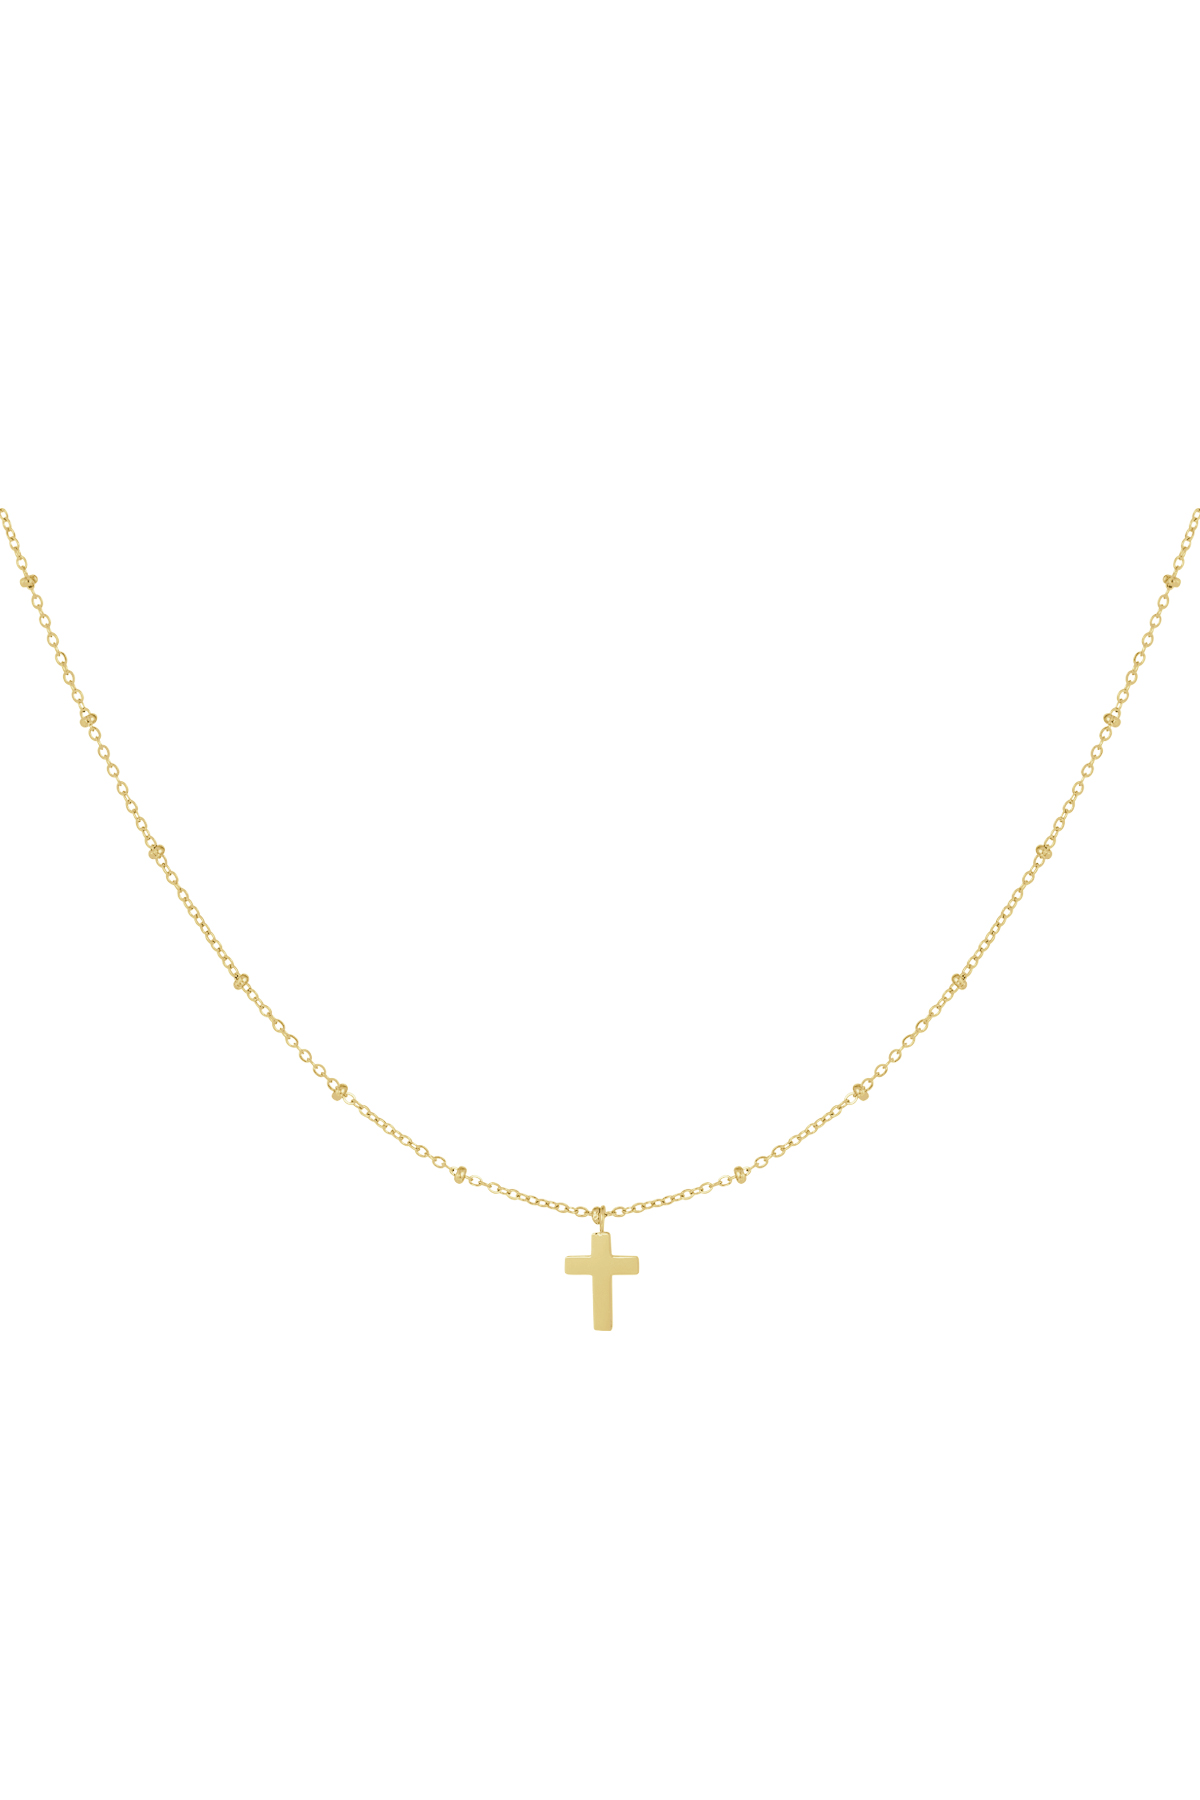 Necklace cross - gold Stainless Steel h5 